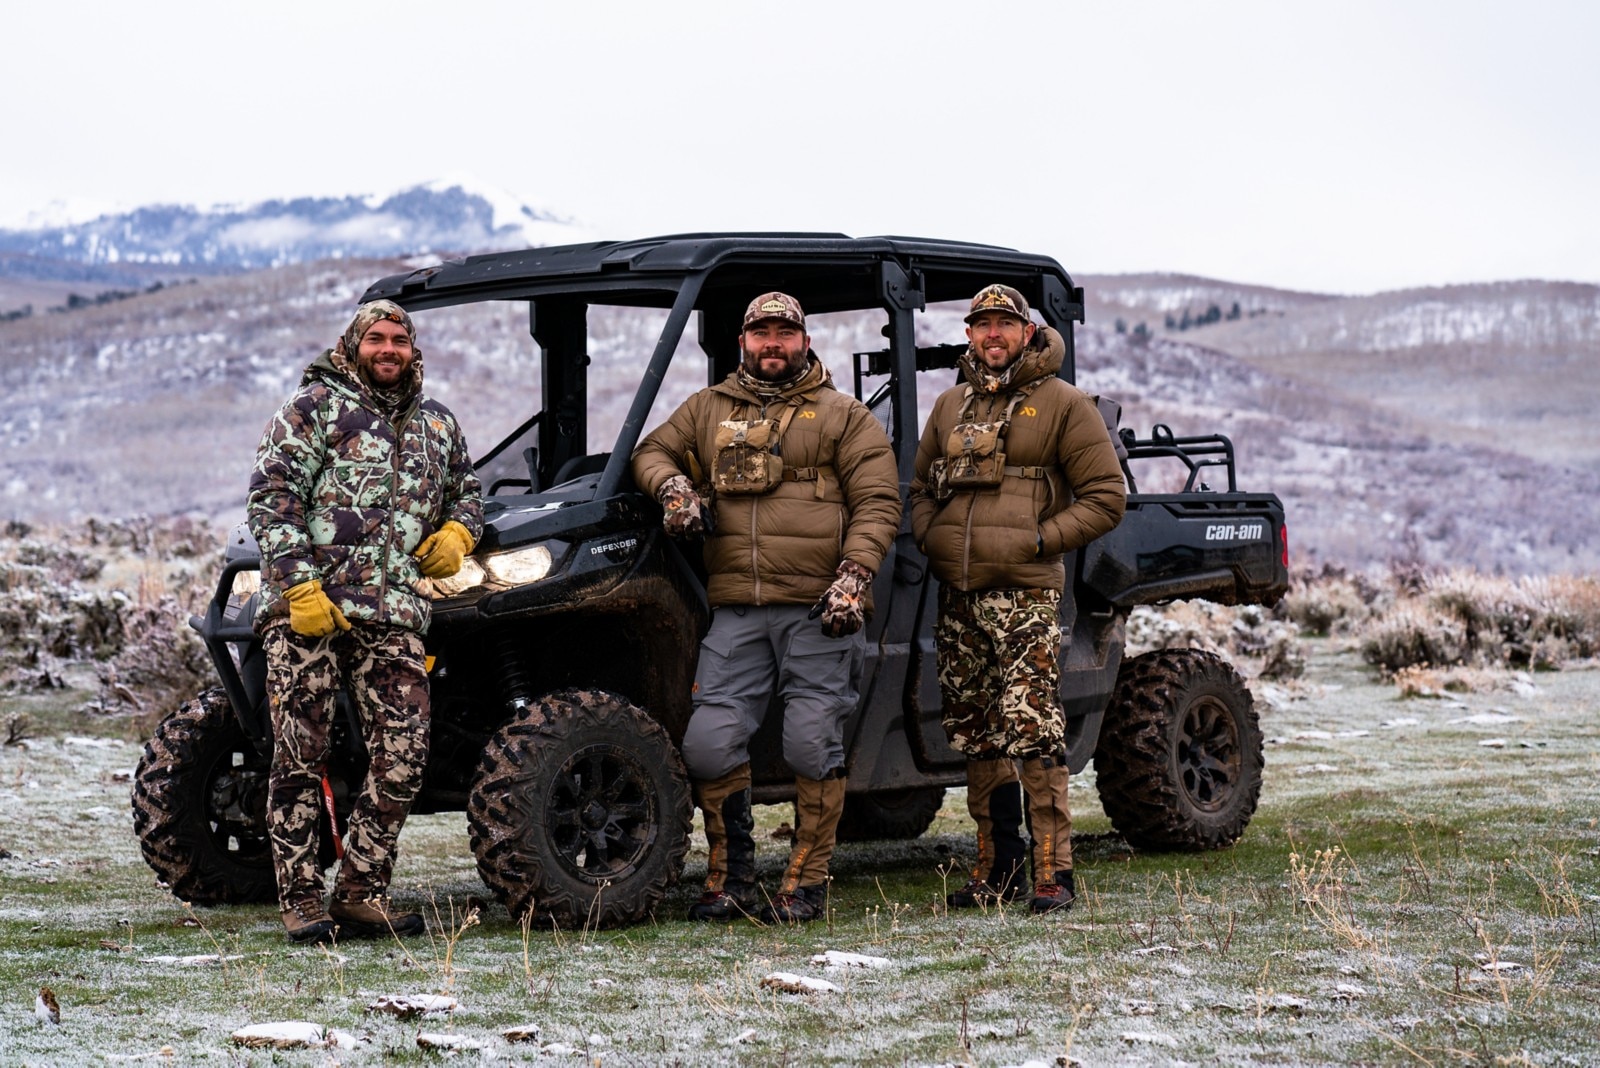 Three hunters from the Hushin' crew dressed in camo, leaning on their Defender parked in a field at the base of snowy mountains.  